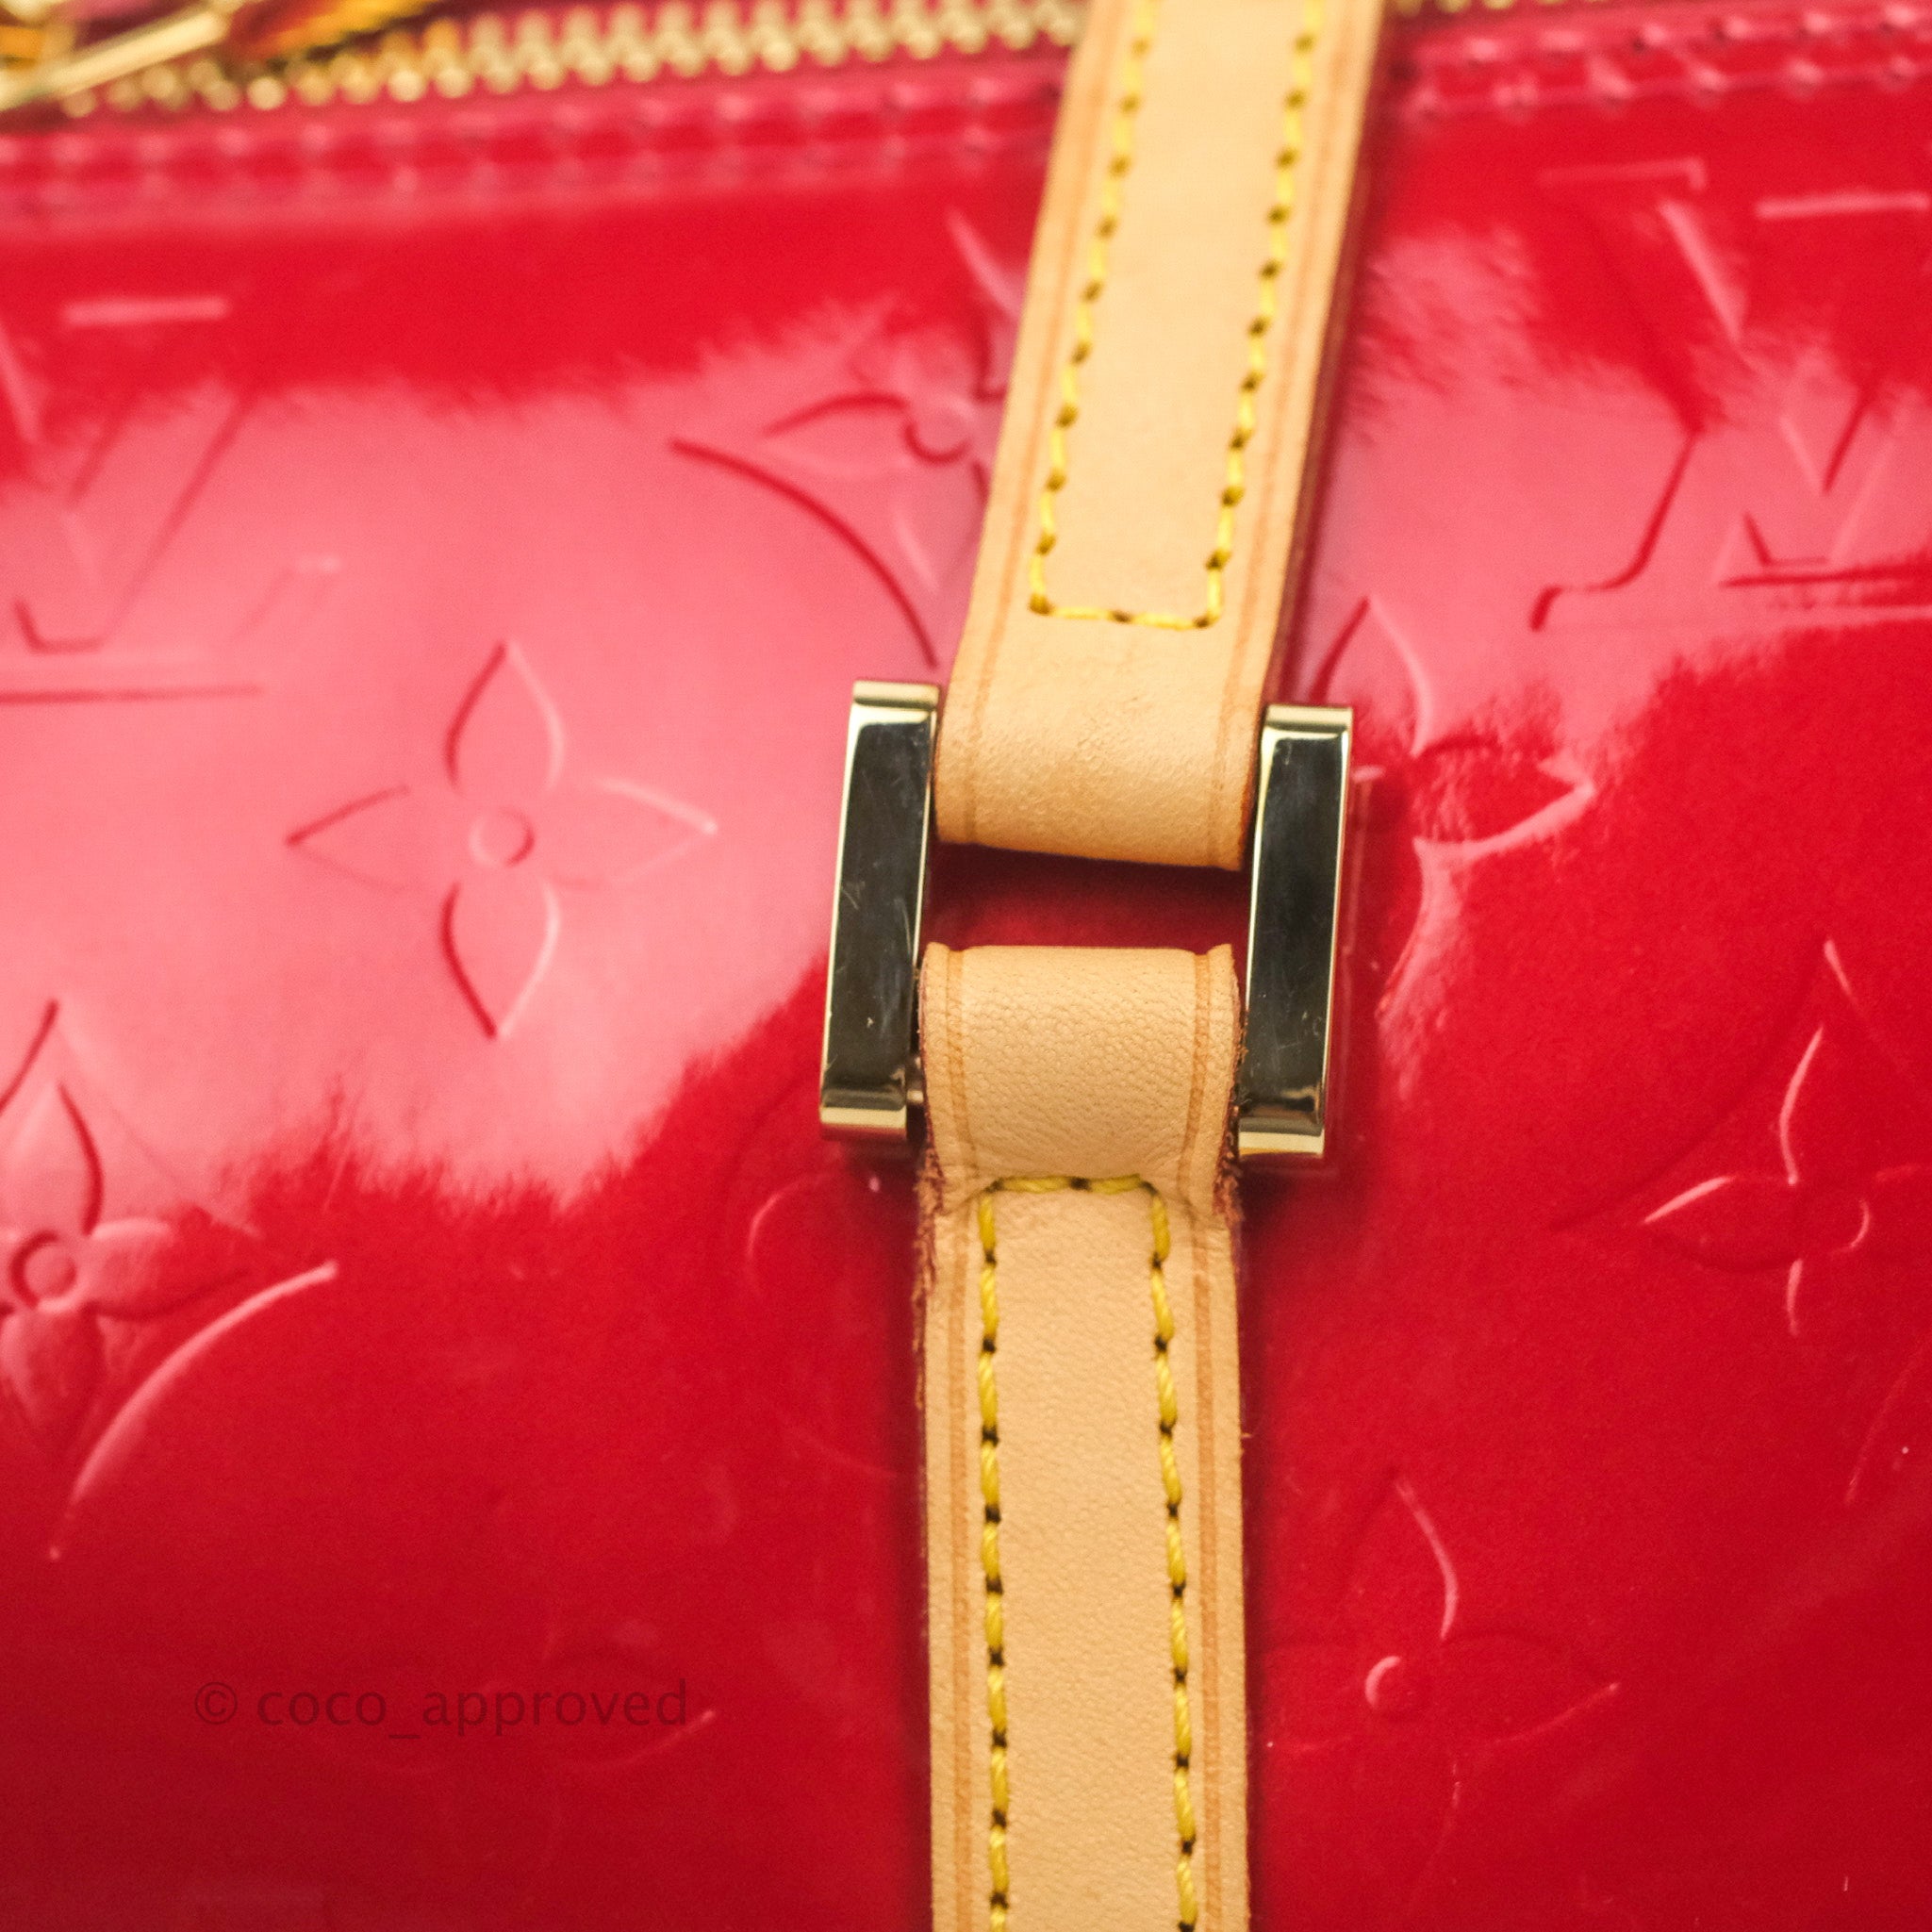 Sold at Auction: A LOUIS VUITTON MONOGRAM TOTE BAG WITH RED PATENT